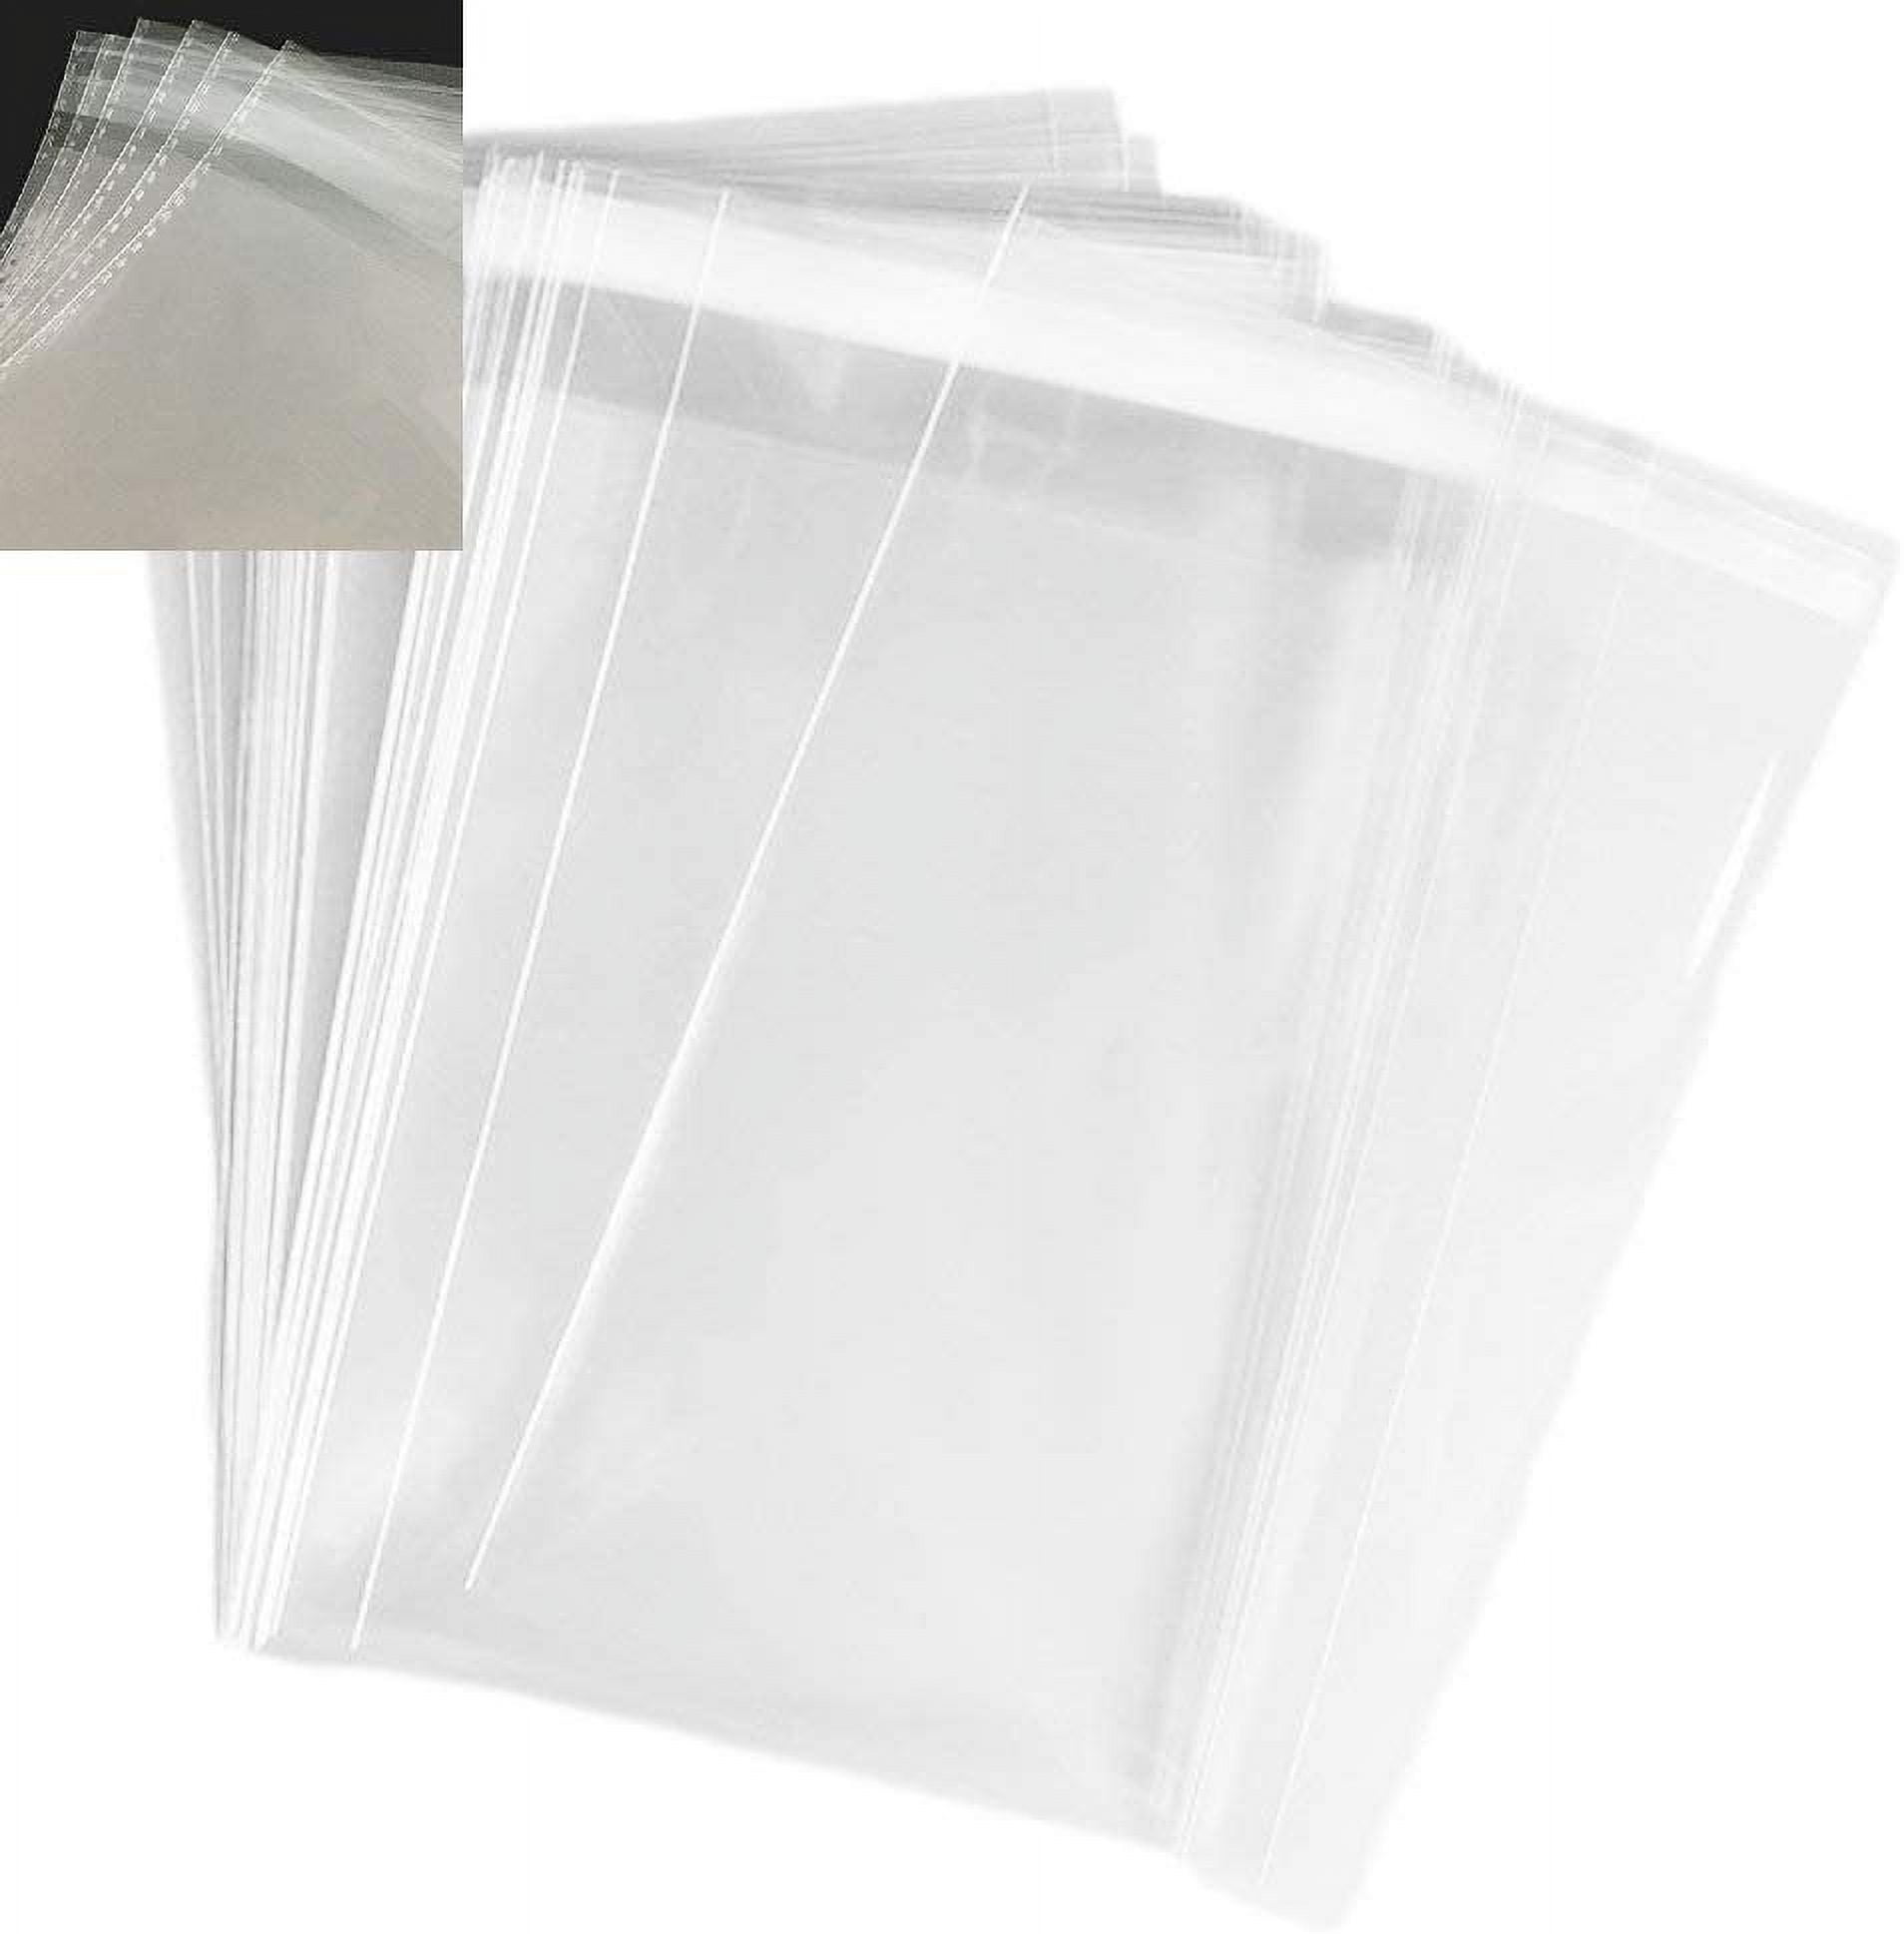 Multi-Layer 3 Layer Plastic Bag (Durable Packaging) in Kovilpatti at best  price by Mahesh Plastic - Justdial